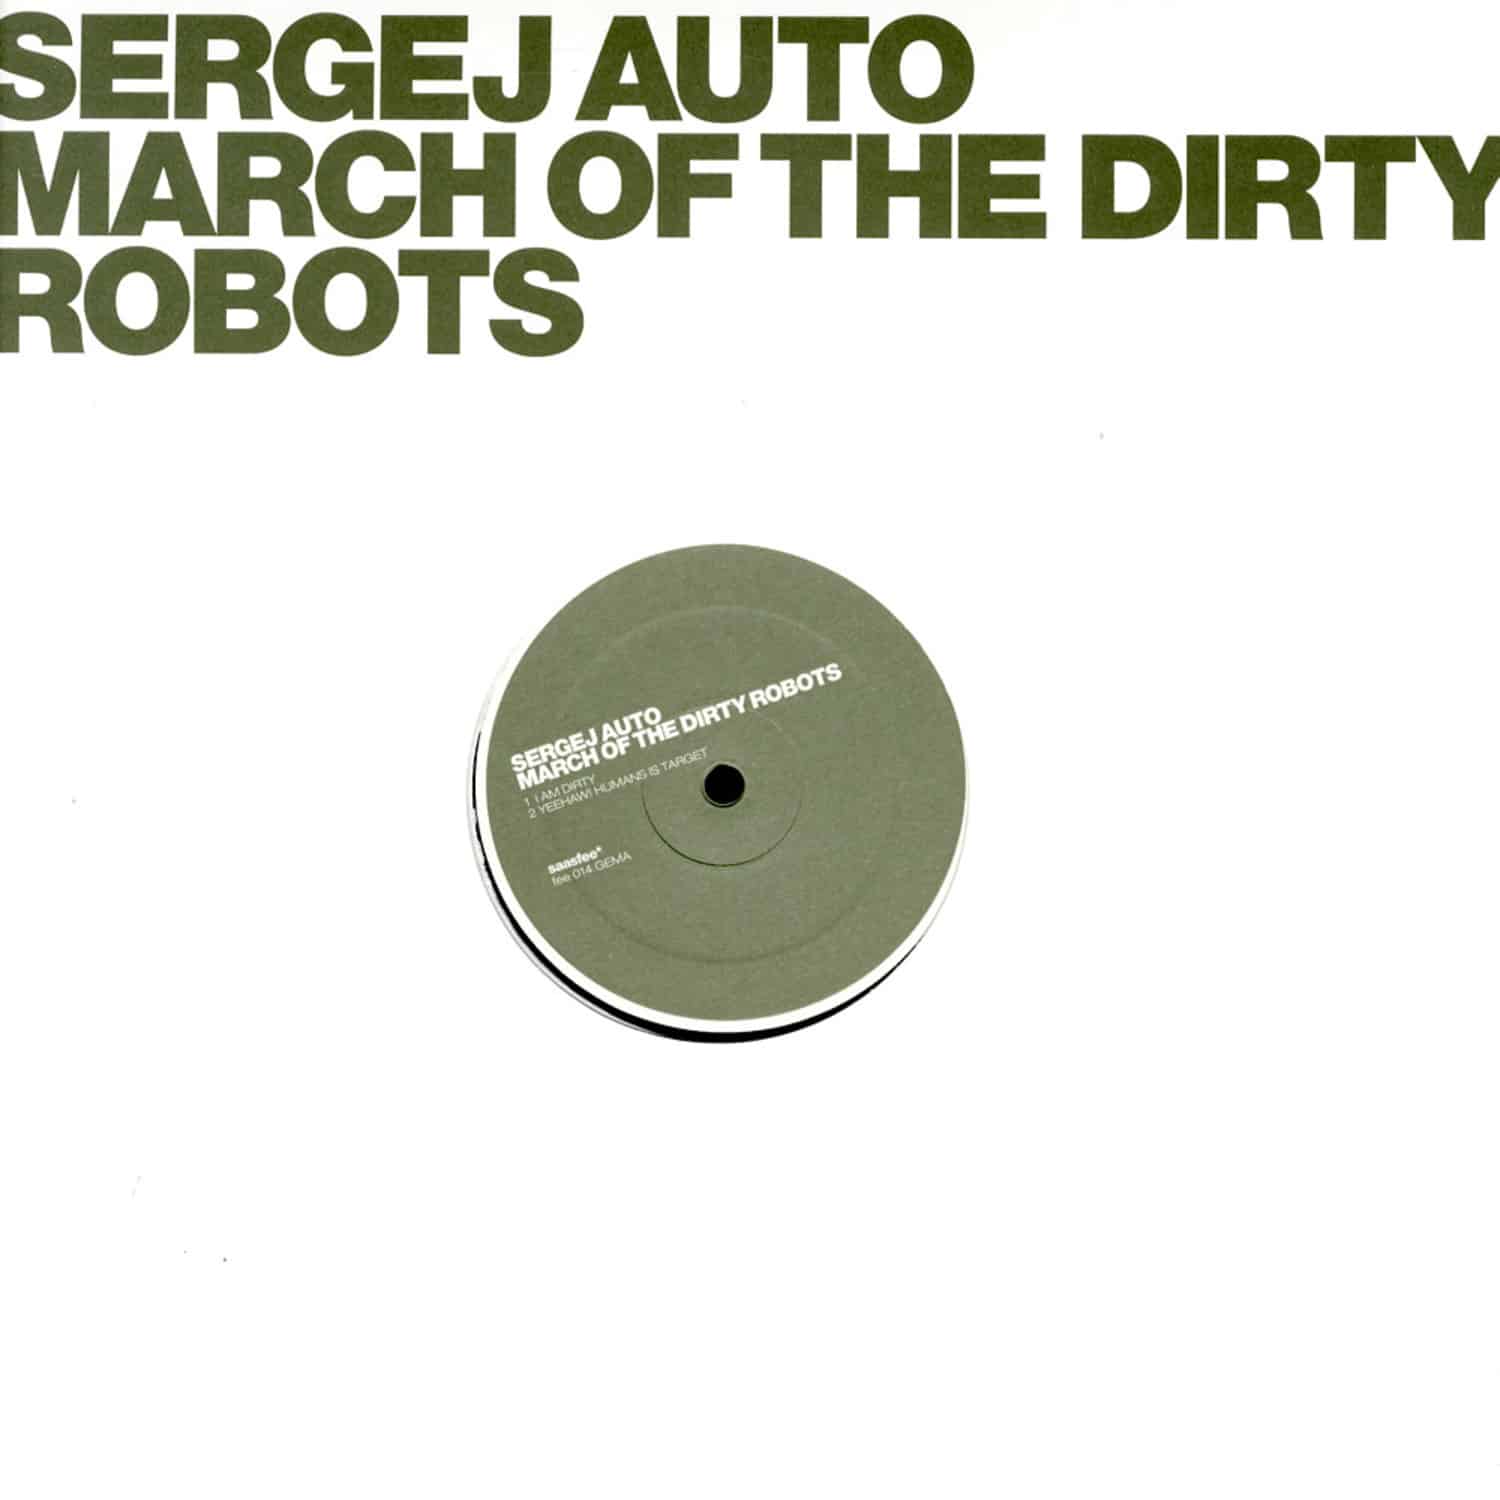 Sergej Auto - MARCH OF THE DIRTY ROBOTS